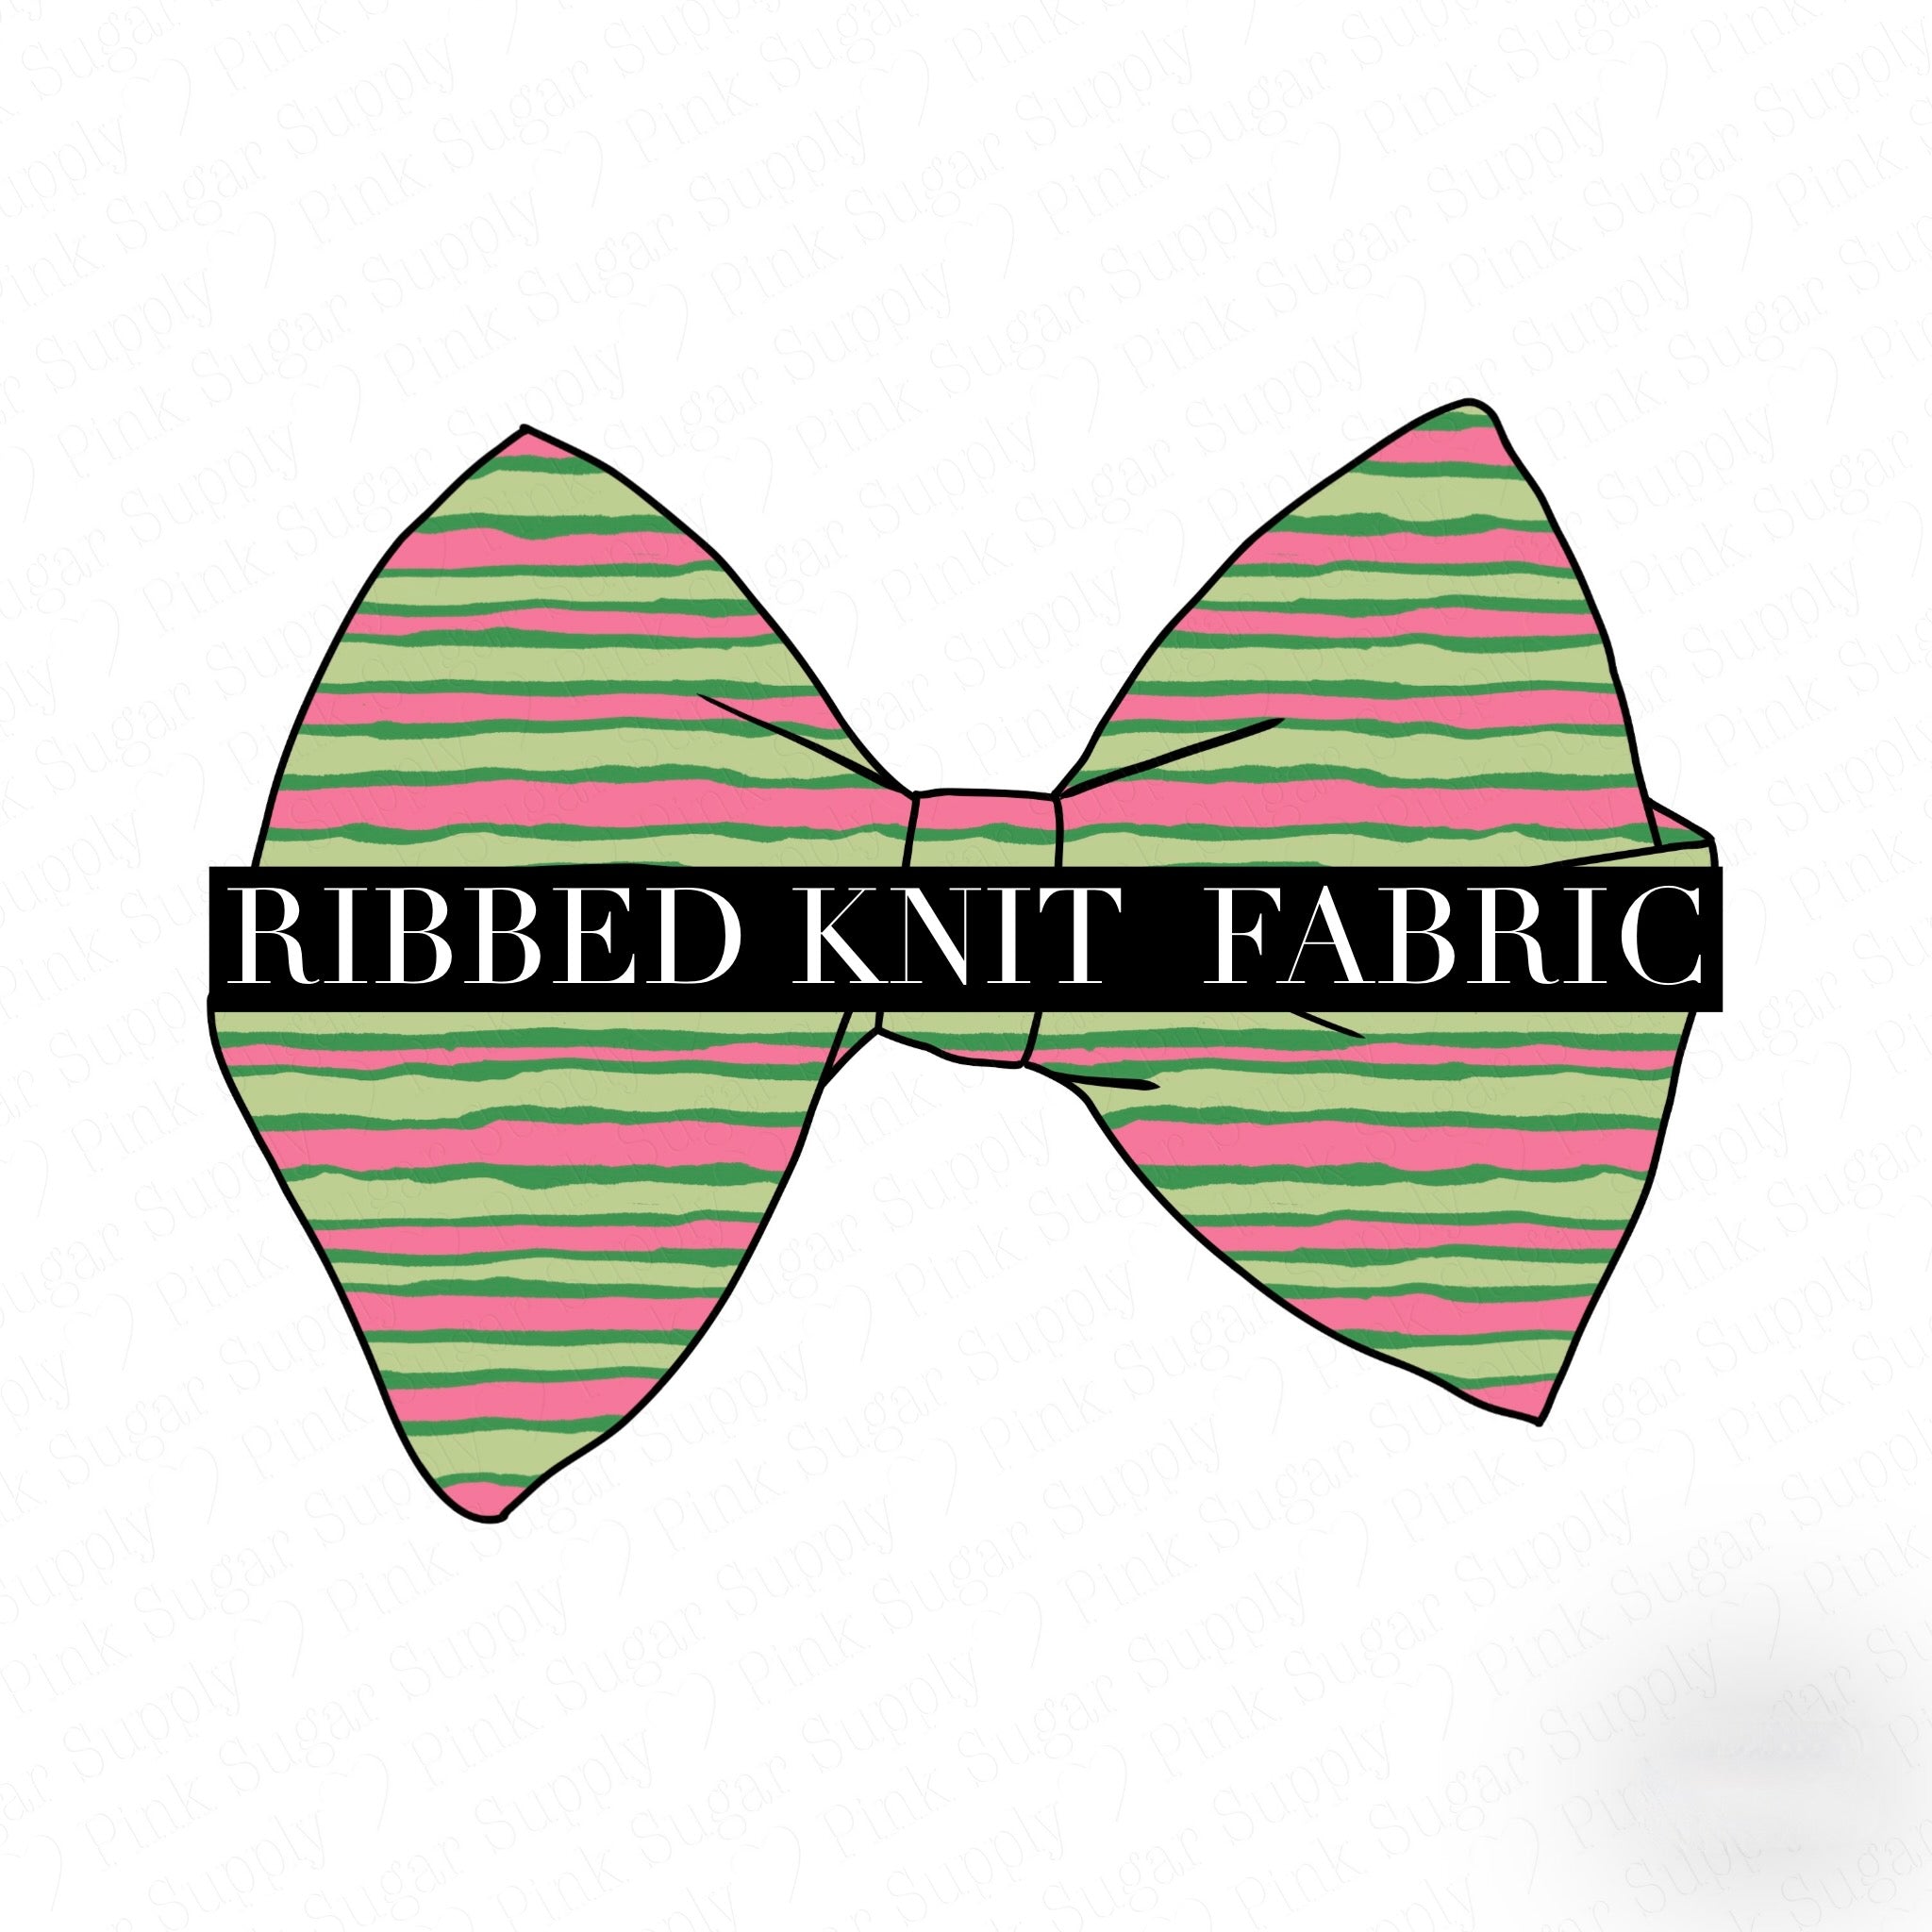 **$1 SALE** *RIBBED KNIT* Fabric PRE-TIED CLOSED EDGE BOW* Watermelon Stripes RIBBED KNIT Fabric-Wholesale Price